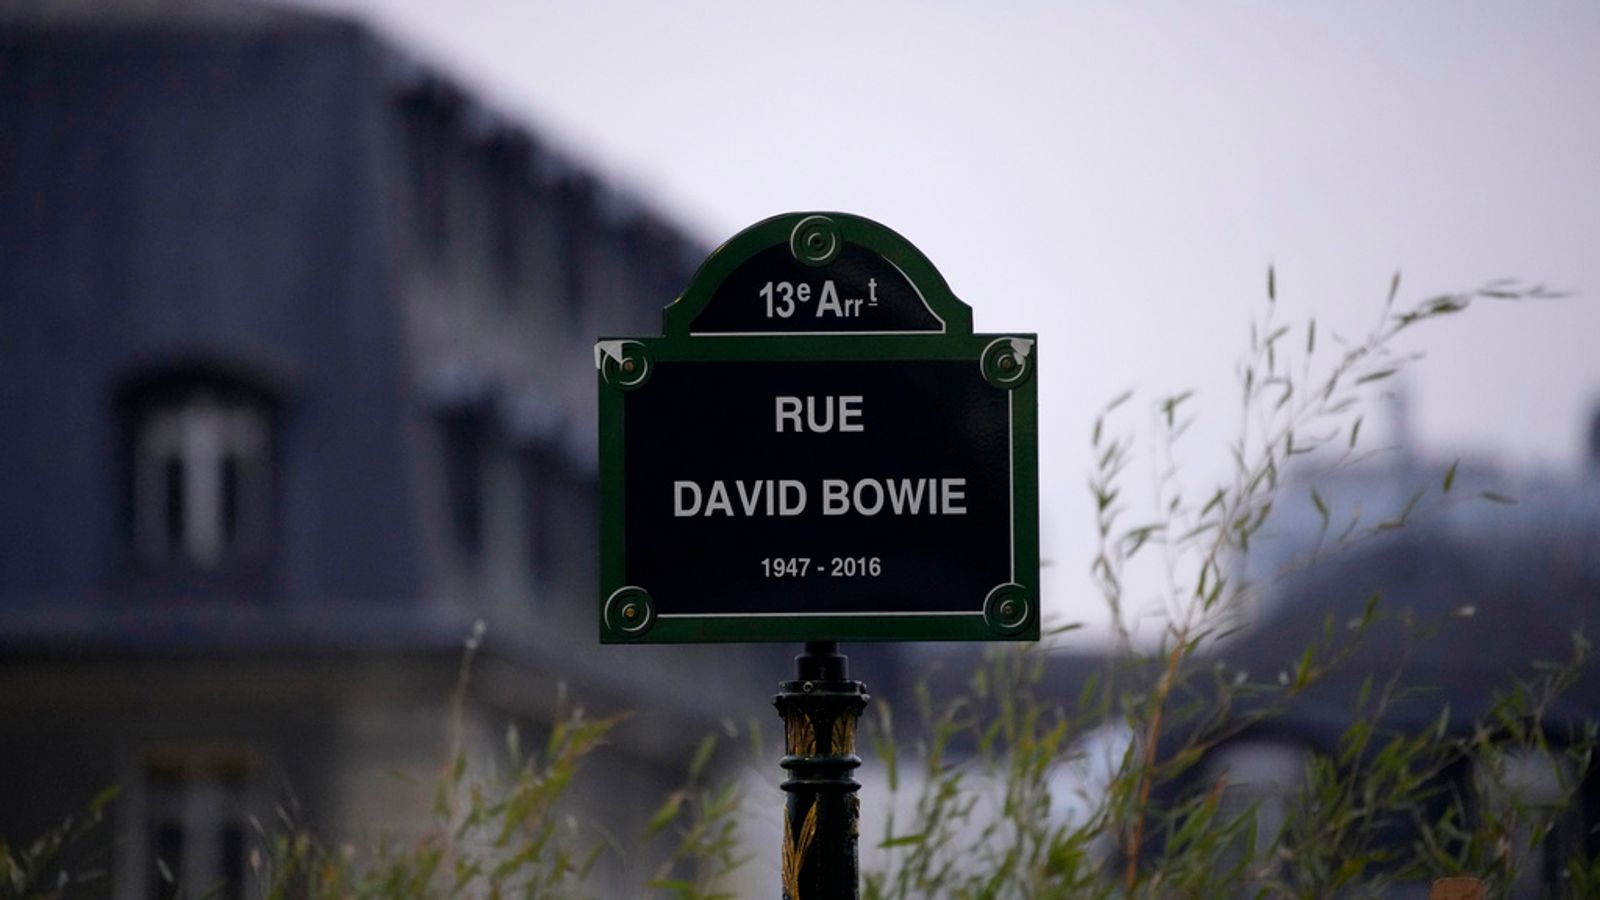 Paris honours David Bowie with his own street